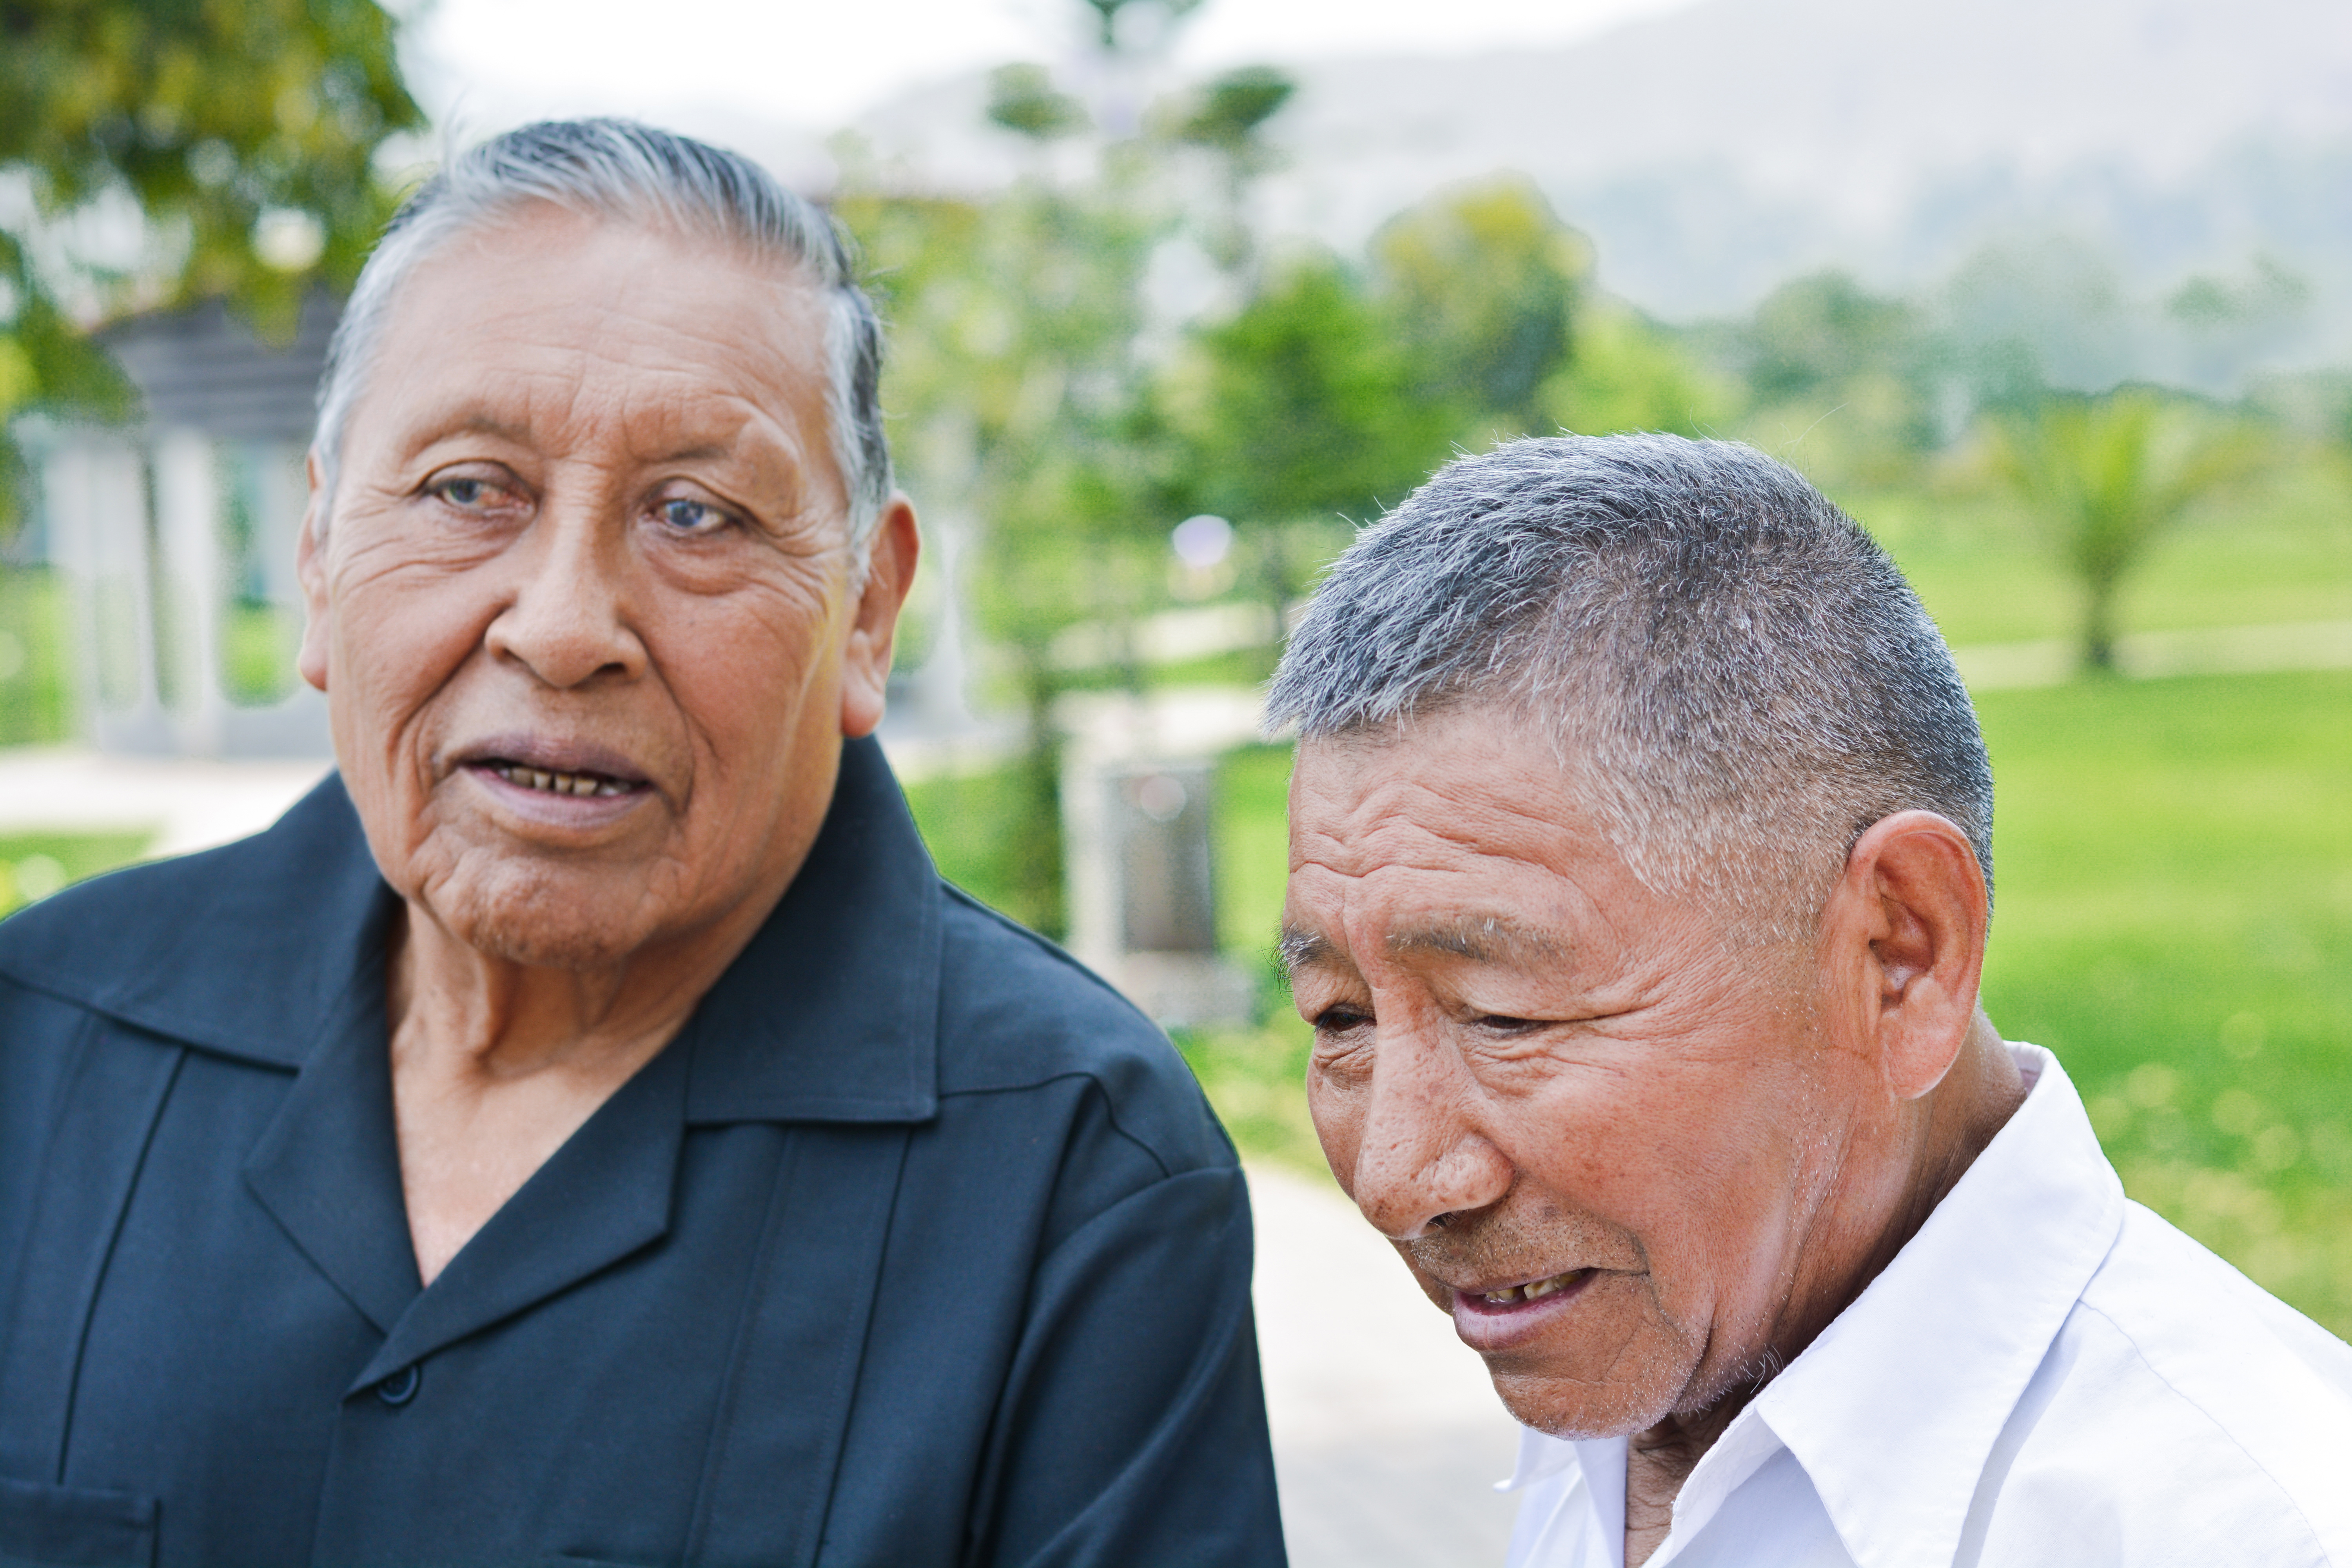 Two older adult men standing next to each other